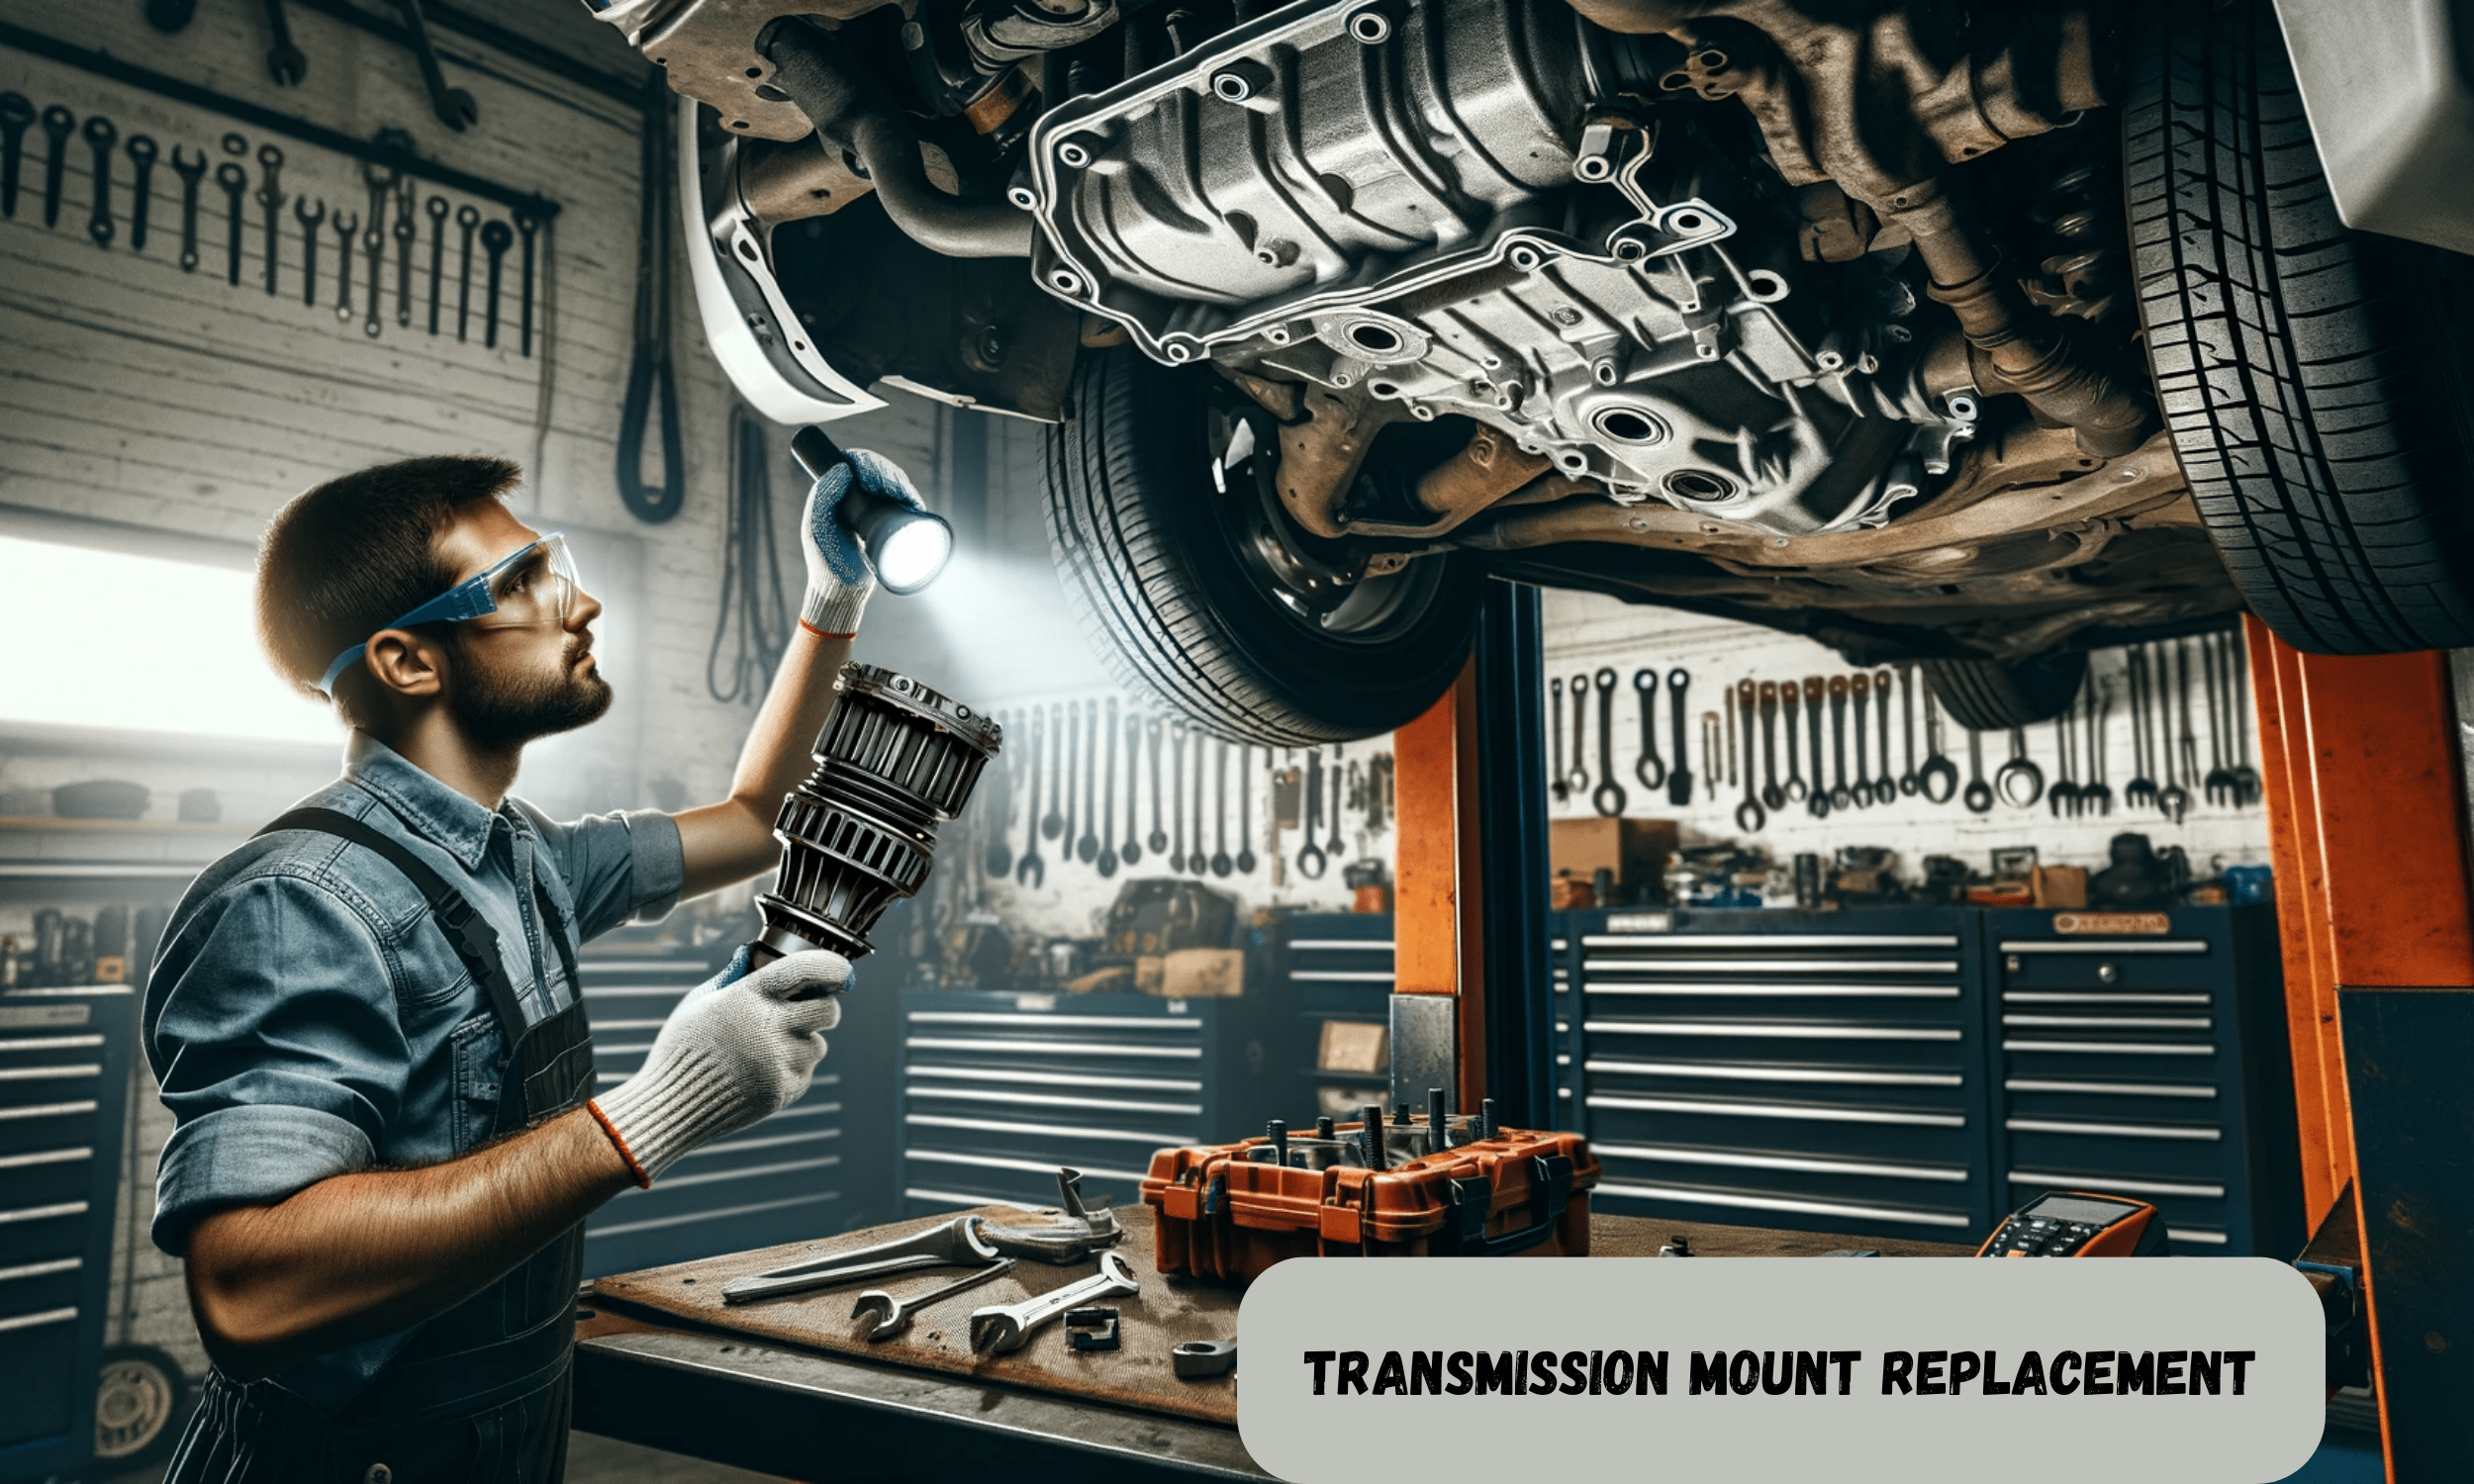 Transmission mount replacement: fix in service